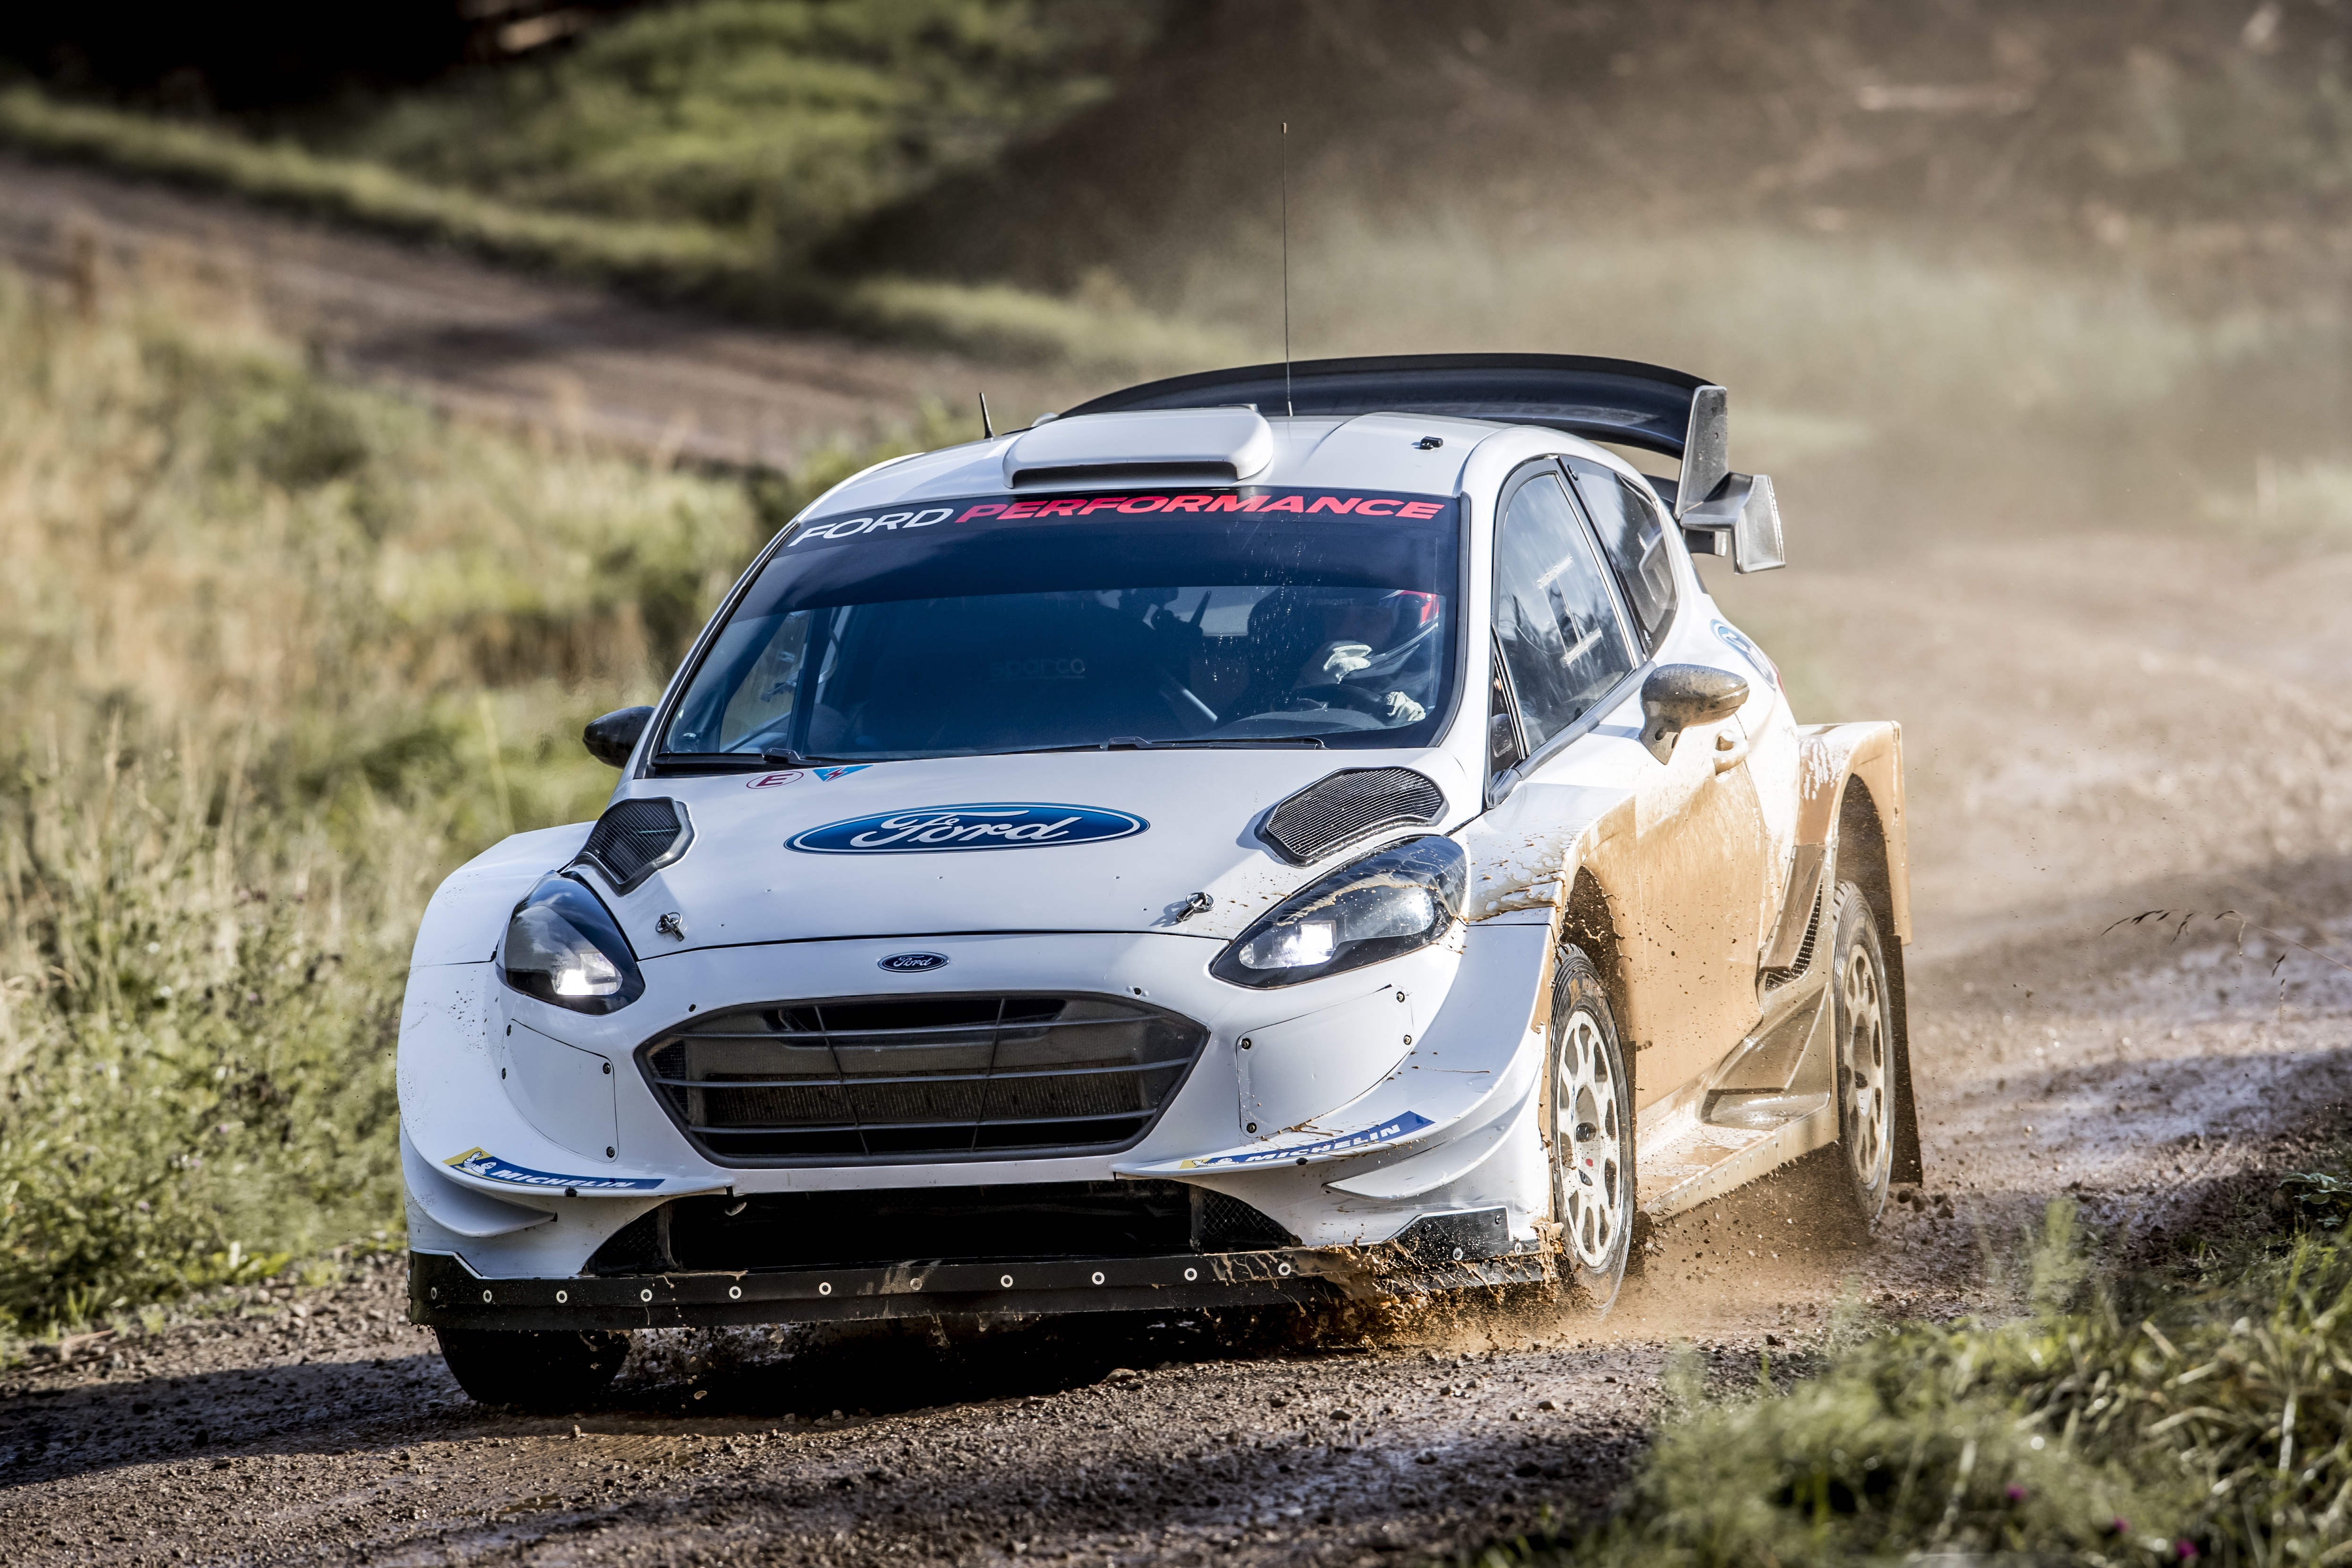 The Fiesta stormed through the Cumbrian test track